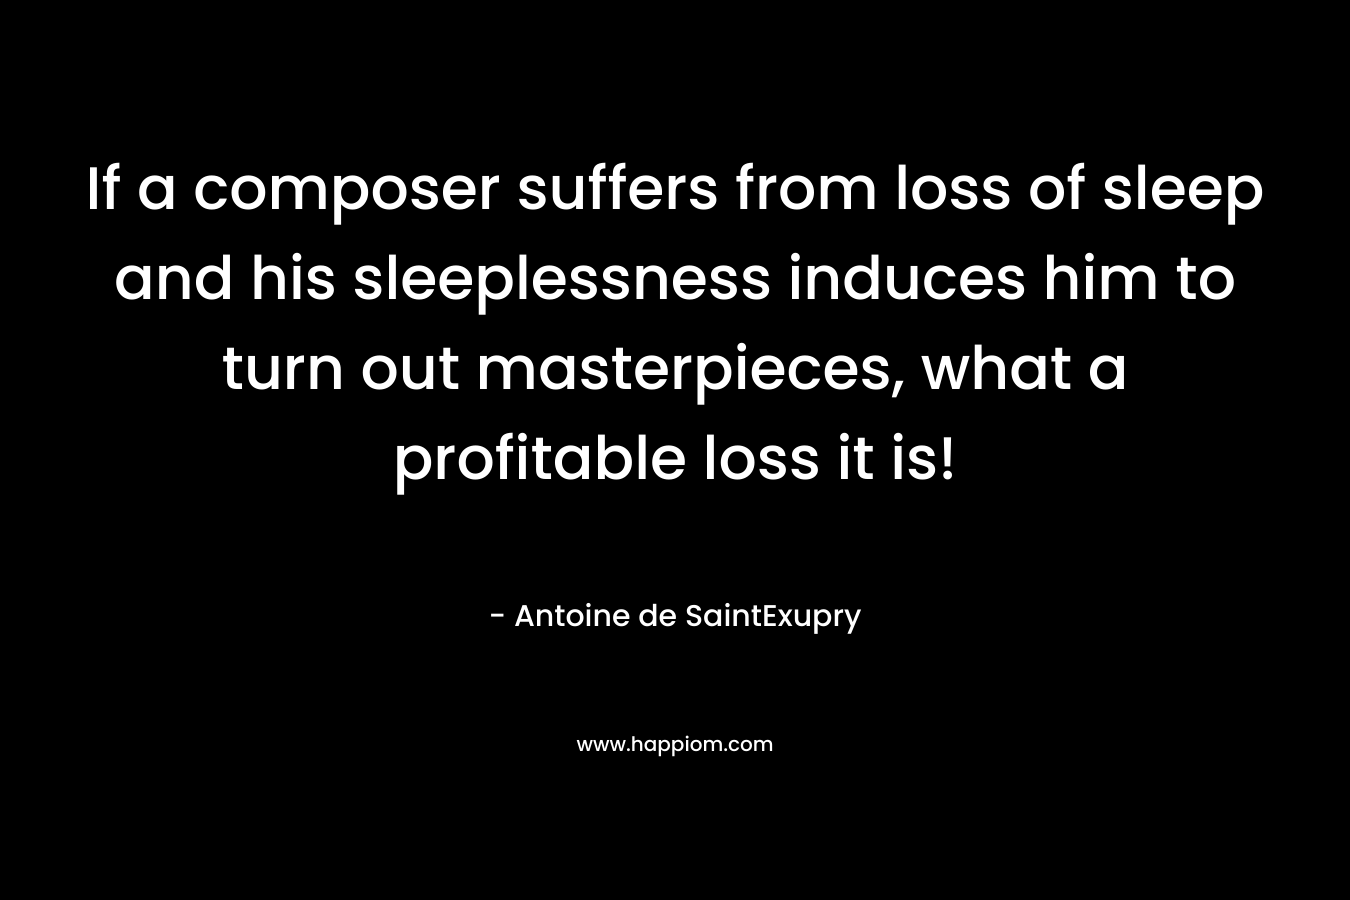 If a composer suffers from loss of sleep and his sleeplessness induces him to turn out masterpieces, what a profitable loss it is! – Antoine de SaintExupry